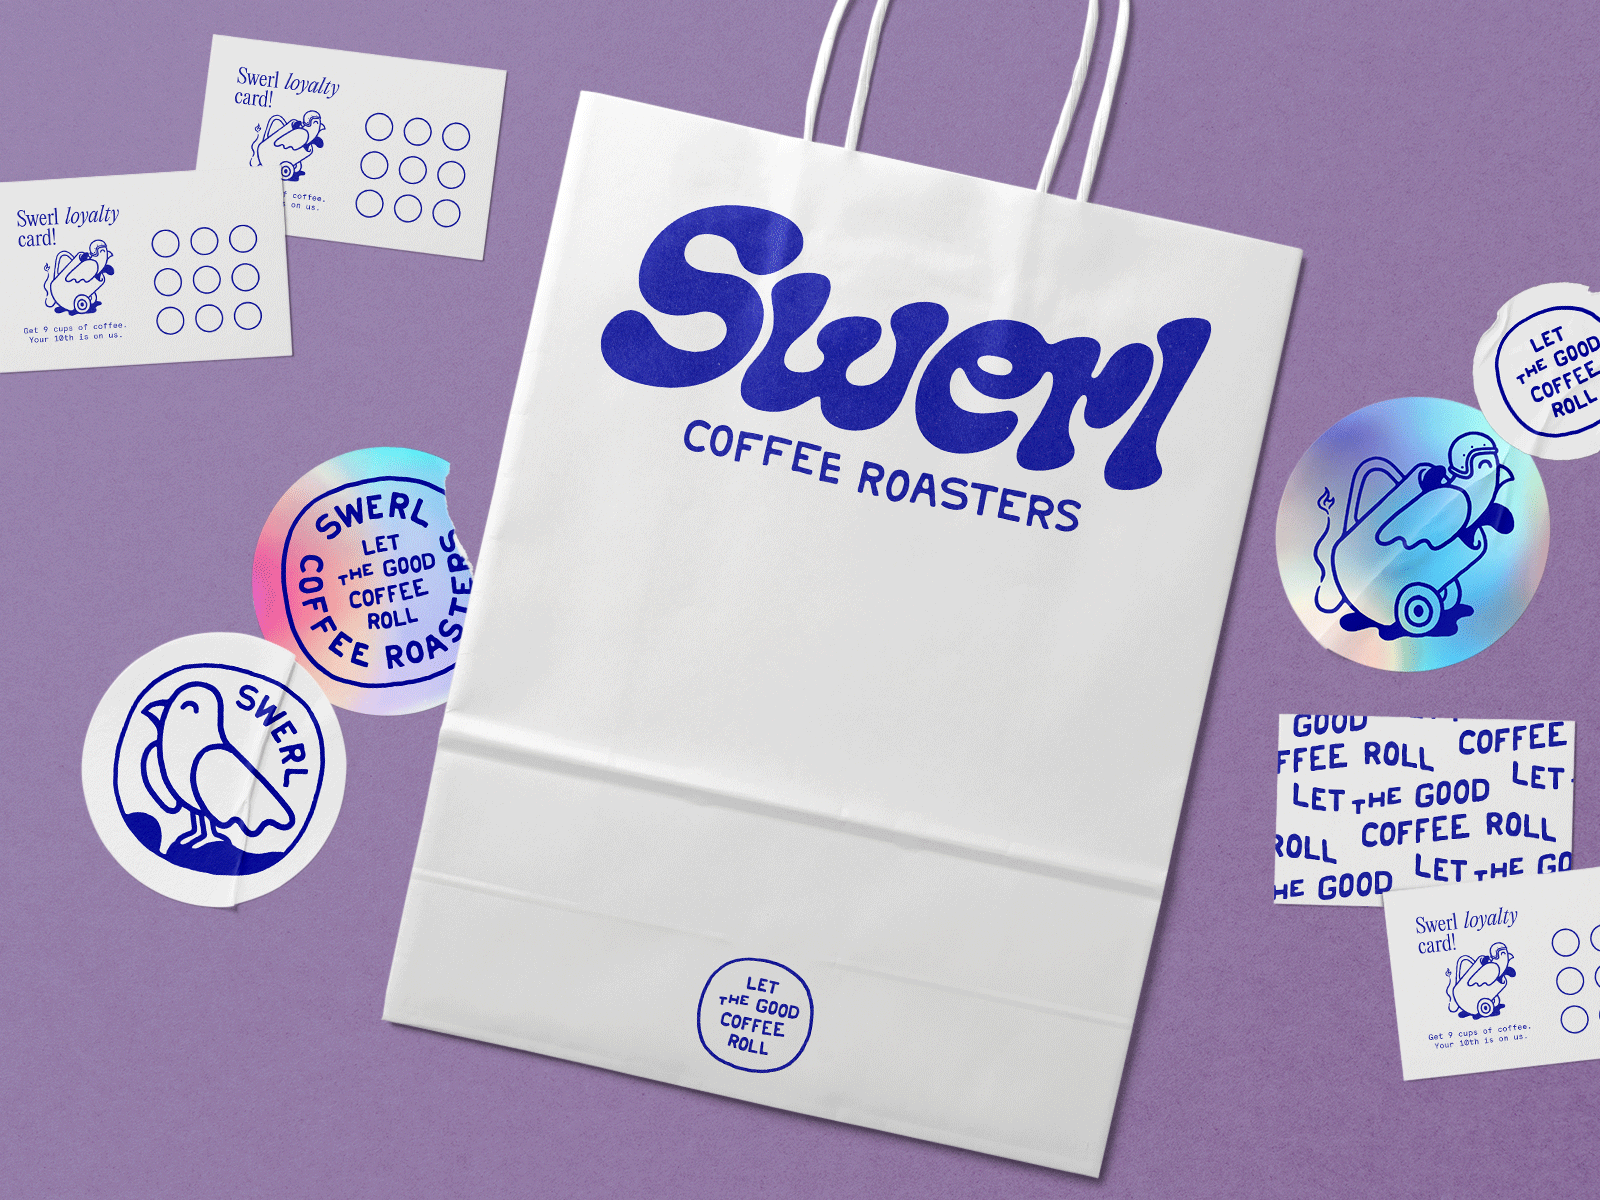 Your 10th is on us! brand identity branding café branding coffee coffee branding coffee roastery coffee takeaway design graphic design illustration let the good coffee roll loyalty card roastery branding stickers swerl coffee roasters type typography